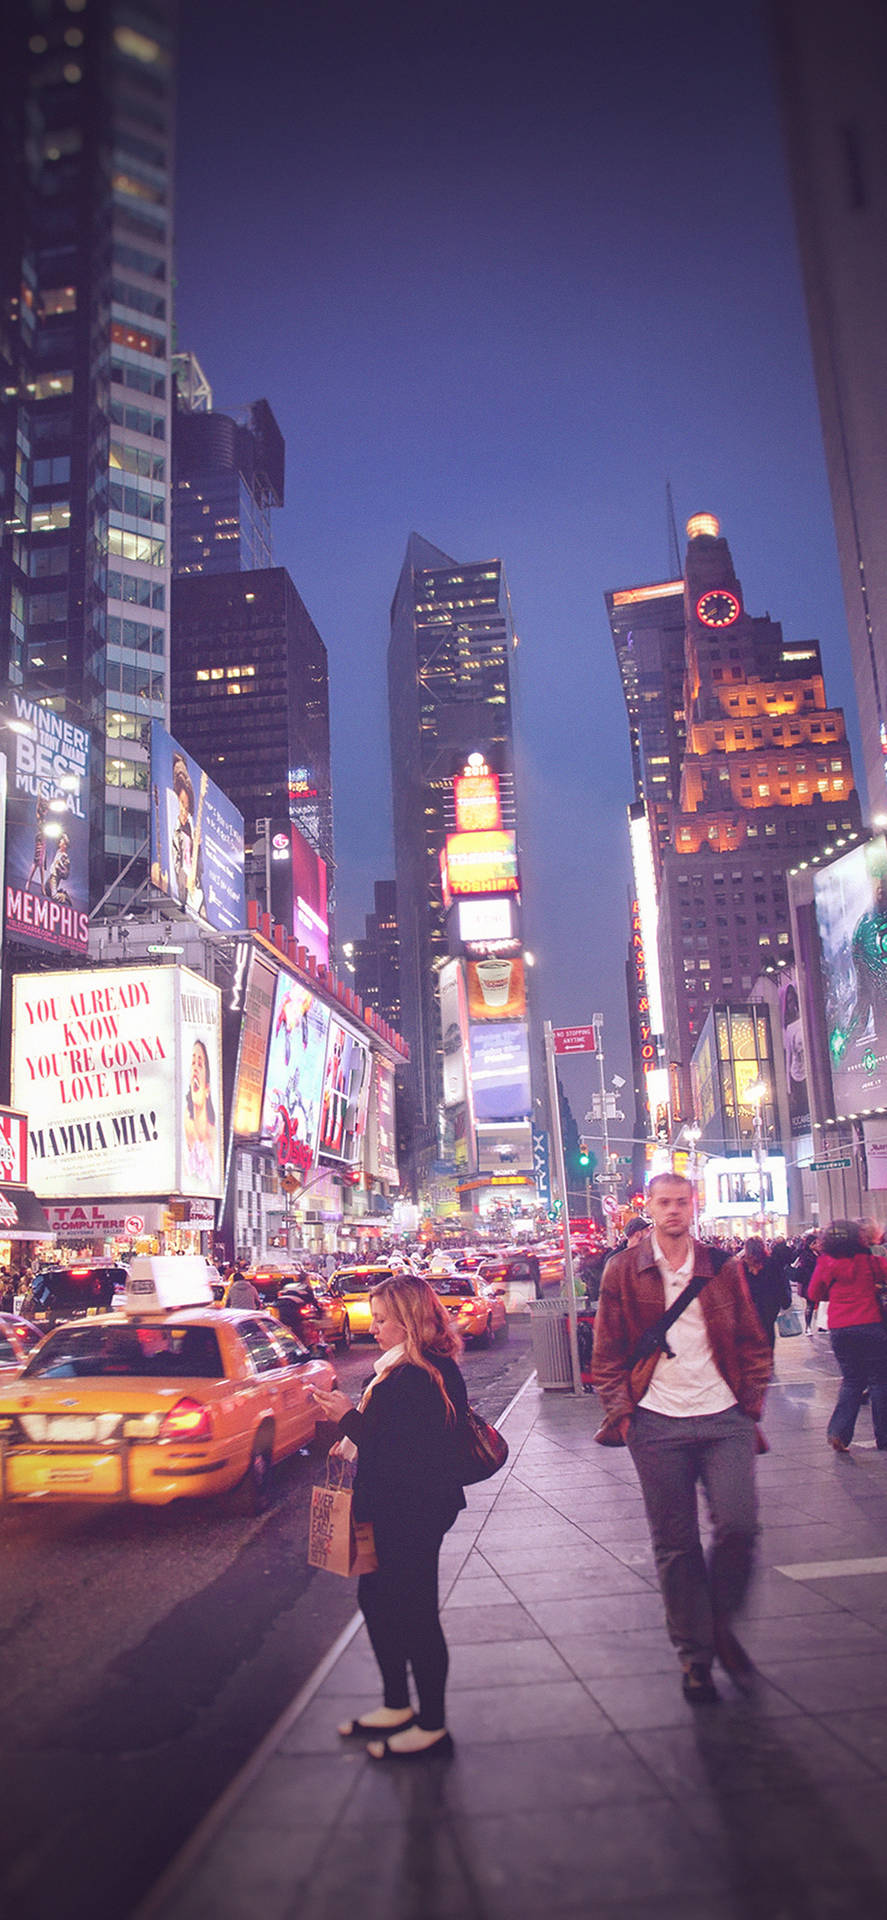 "Experience the Big Apple with a New York Hd Iphone" Wallpaper